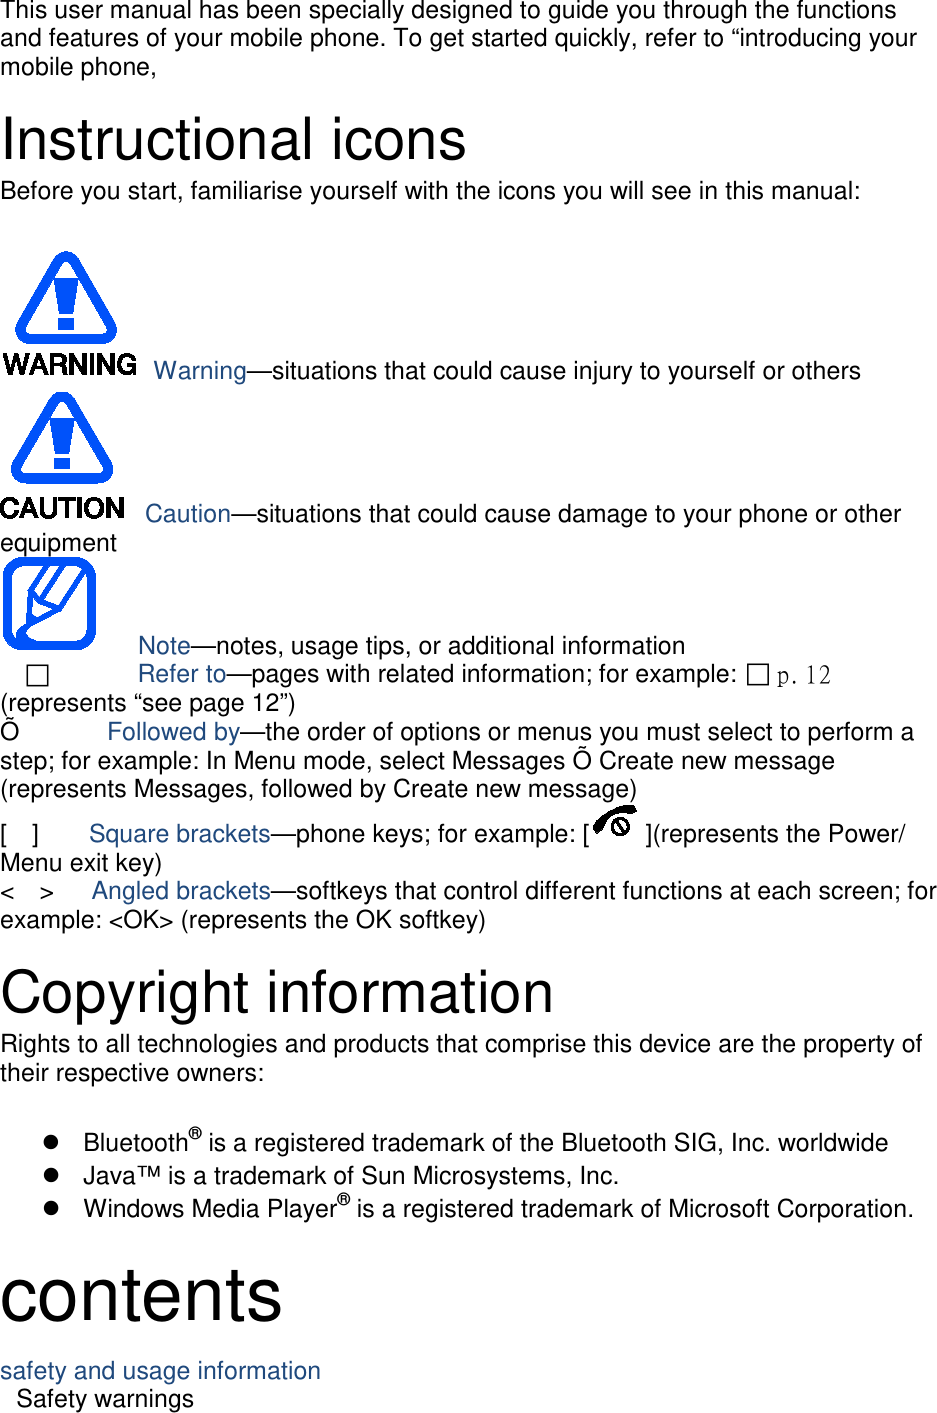 This user manual has been specially designed to guide you through the functions and features of your mobile phone. To get started quickly, refer to “introducing your mobile phone,  Instructional icons Before you start, familiarise yourself with the icons you will see in this manual:     Warning—situations that could cause injury to yourself or others  Caution—situations that could cause damage to your phone or other equipment    Note—notes, usage tips, or additional information          Refer to—pages with related information; for example:  p. 12 (represents “see page 12”) Õ       Followed by—the order of options or menus you must select to perform a step; for example: In Menu mode, select Messages Õ Create new message (represents Messages, followed by Create new message) [  ]    Square brackets—phone keys; for example: [ ](represents the Power/ Menu exit key) &lt;  &gt;   Angled brackets—softkeys that control different functions at each screen; for example: &lt;OK&gt; (represents the OK softkey)  Copyright information Rights to all technologies and products that comprise this device are the property of their respective owners:   Bluetooth® is a registered trademark of the Bluetooth SIG, Inc. worldwide  Java™ is a trademark of Sun Microsystems, Inc.  Windows Media Player® is a registered trademark of Microsoft Corporation.  contents safety and usage information     Safety warnings     